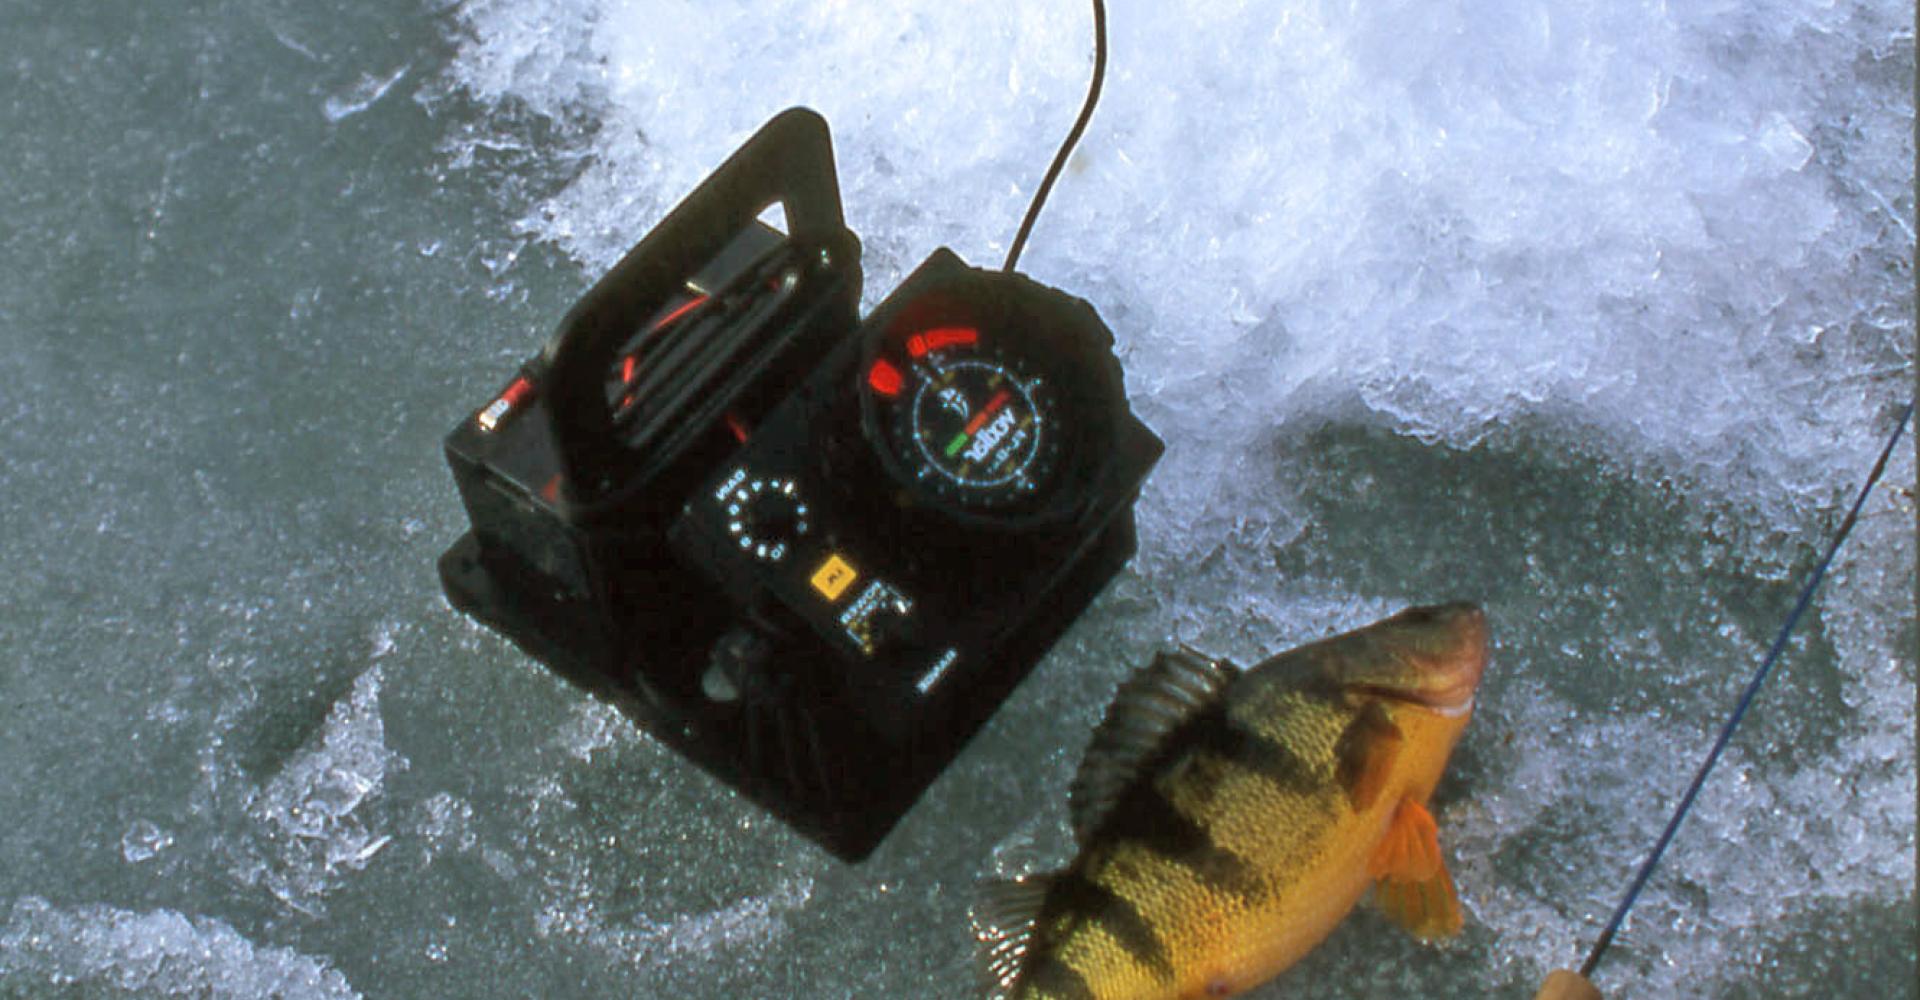 Ice fishing technology takes off in a flasher